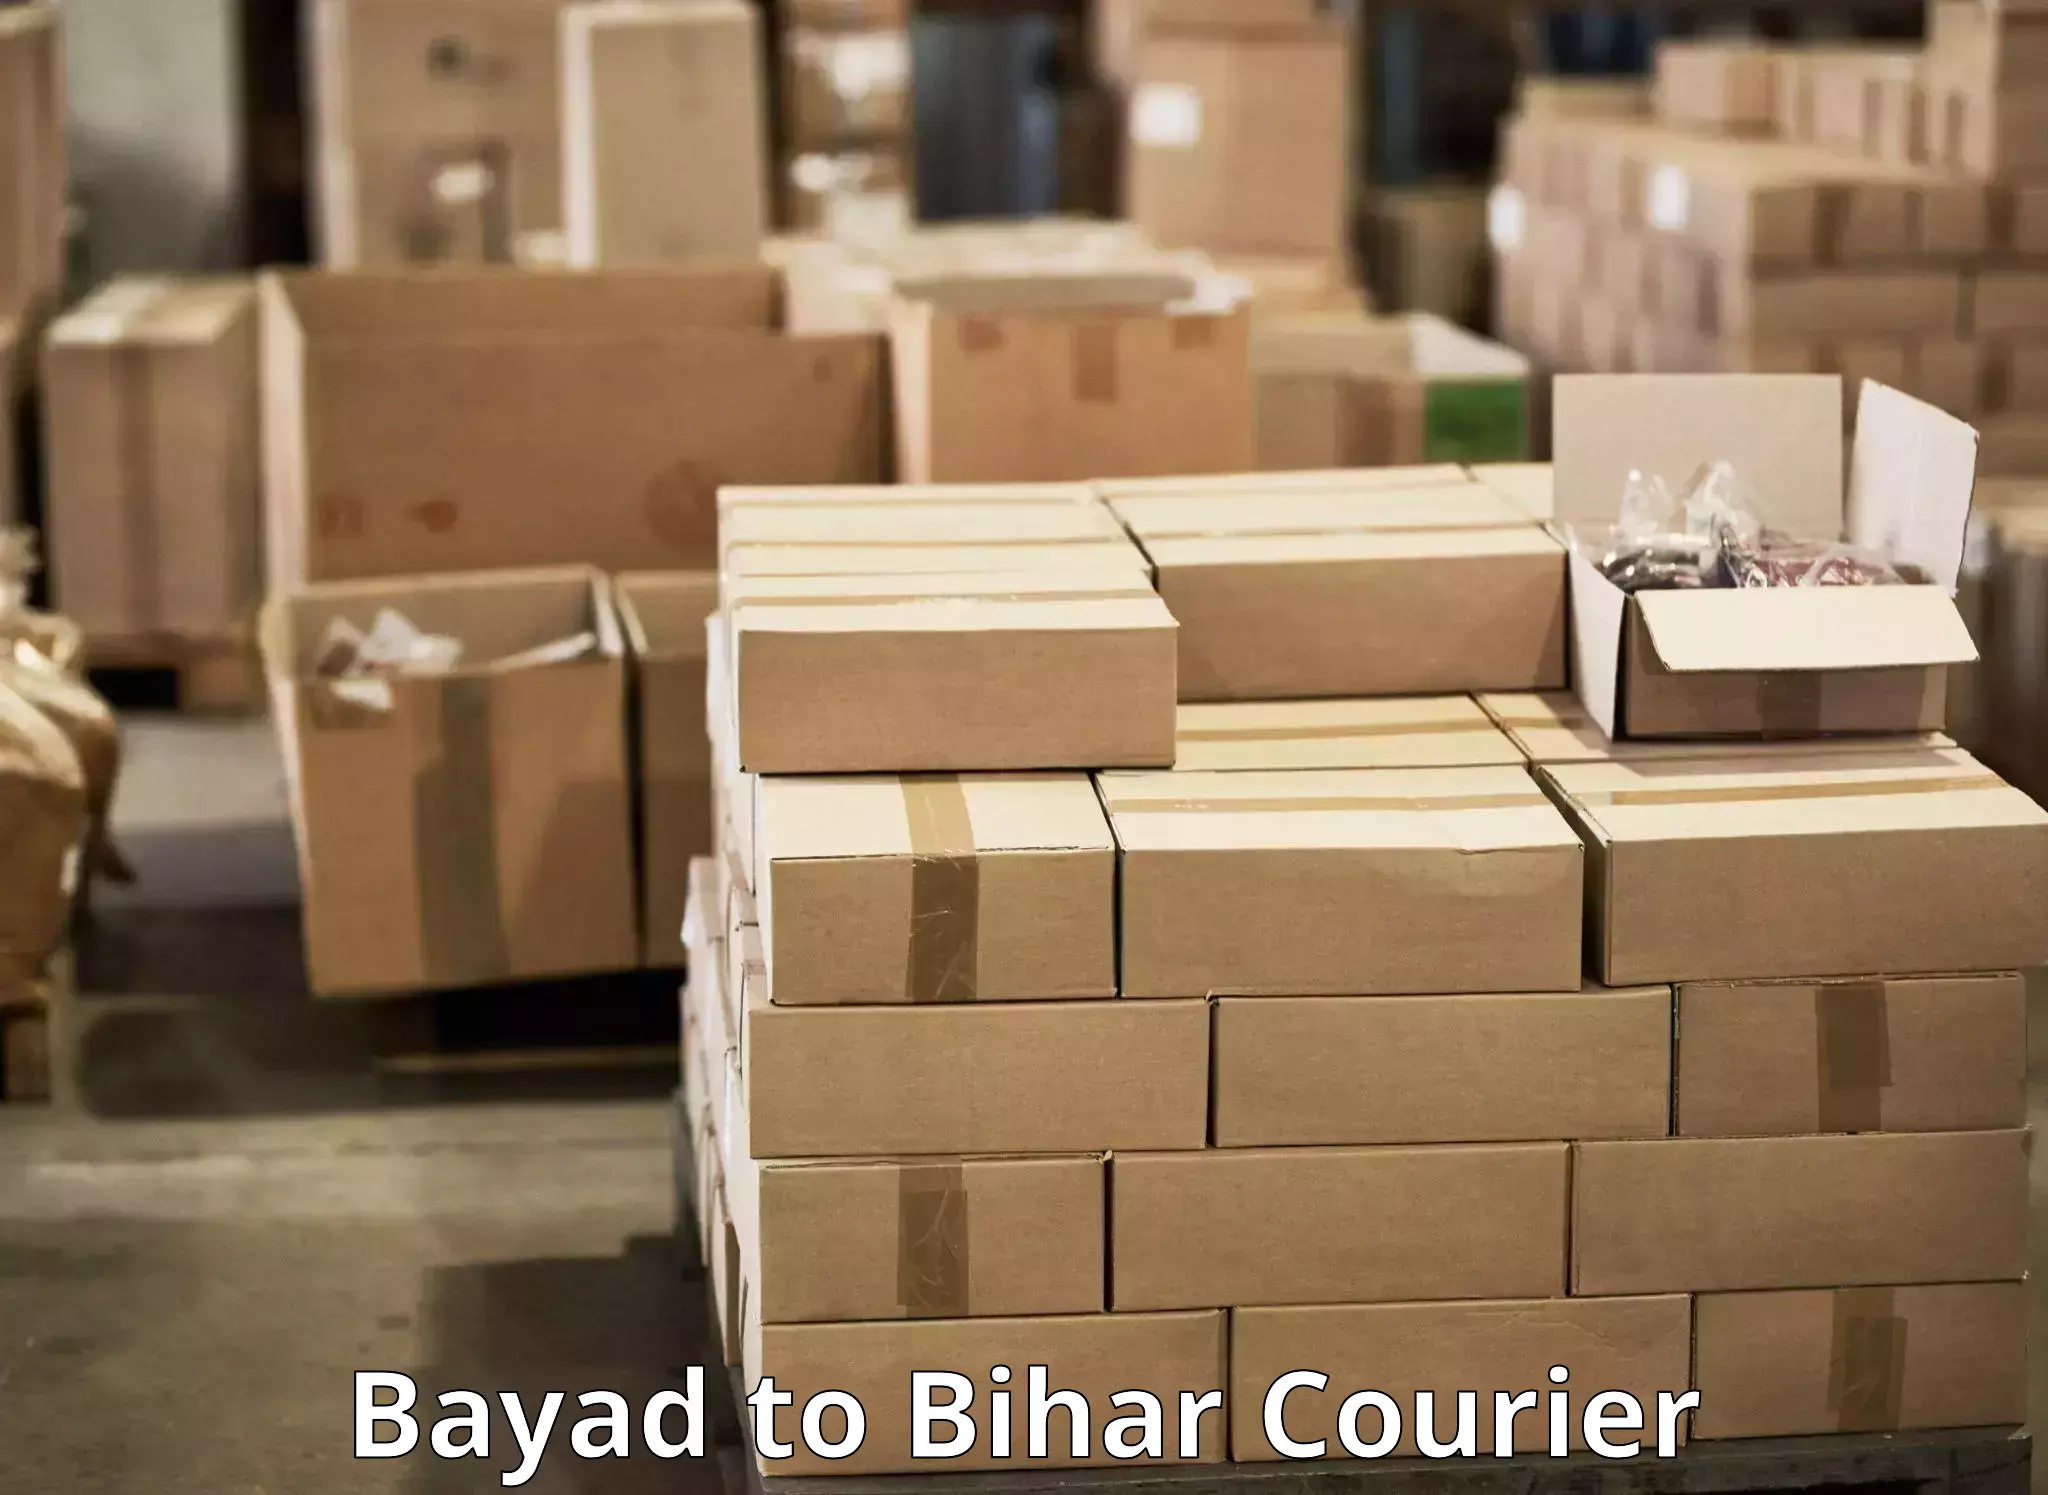 24/7 courier service Bayad to Mohammadpur